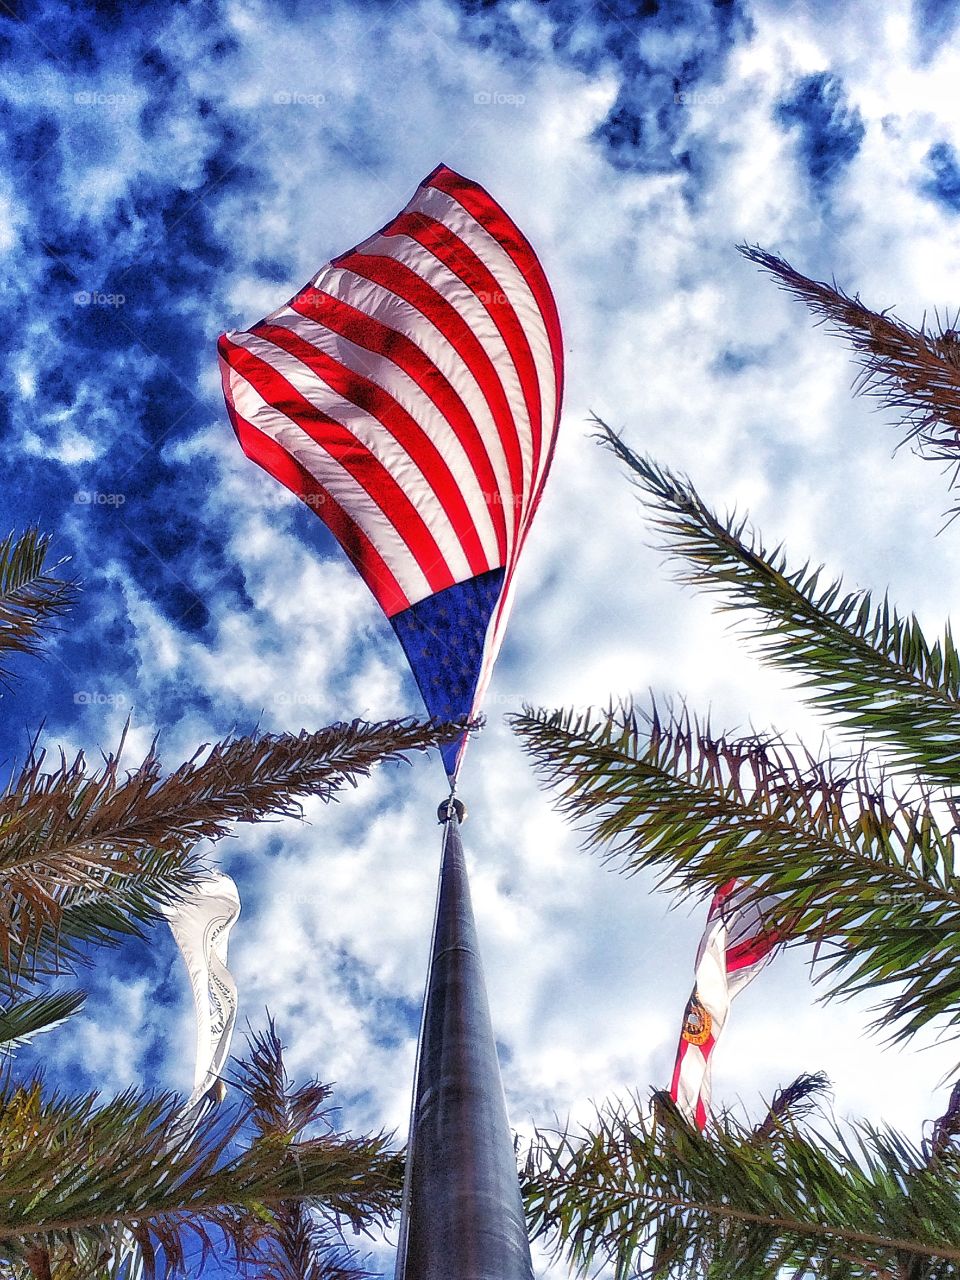 Our Freedom Semper Fi. Captured this beautiful image of the American Flag blowing elegantly at the local library.  As a Marine Corp Disabled Veteran our flags move me every time I see them.  